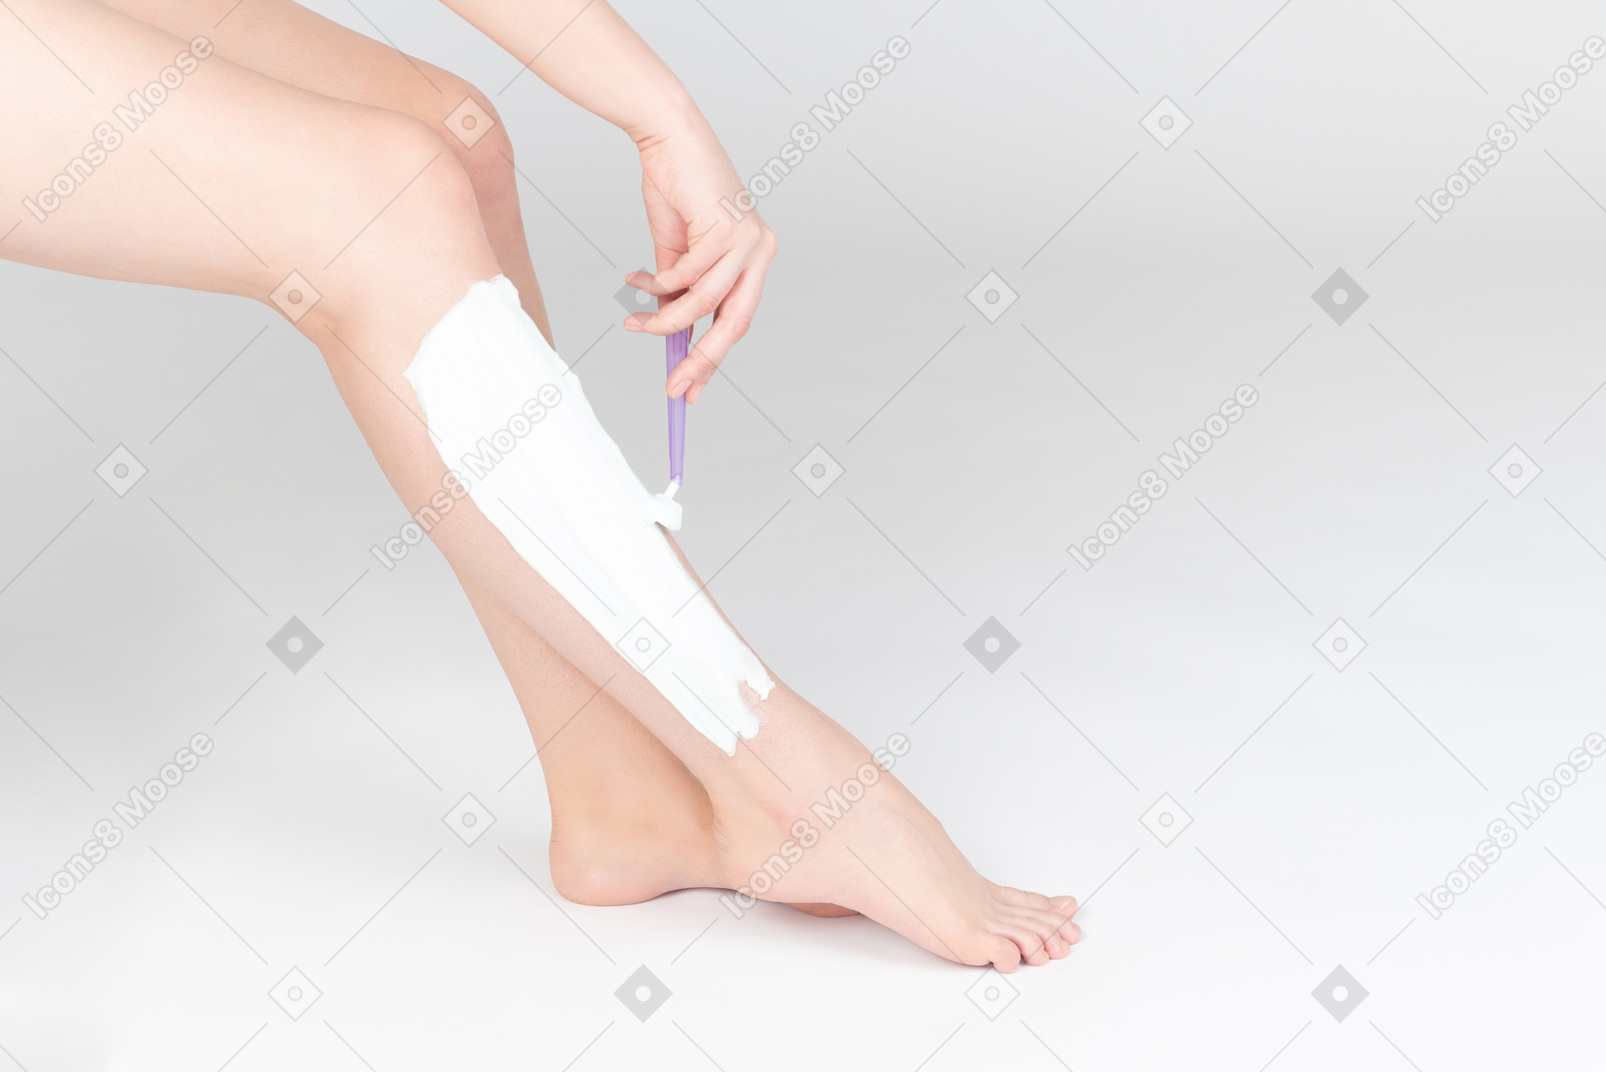 Shot of female legs and woman shaving them